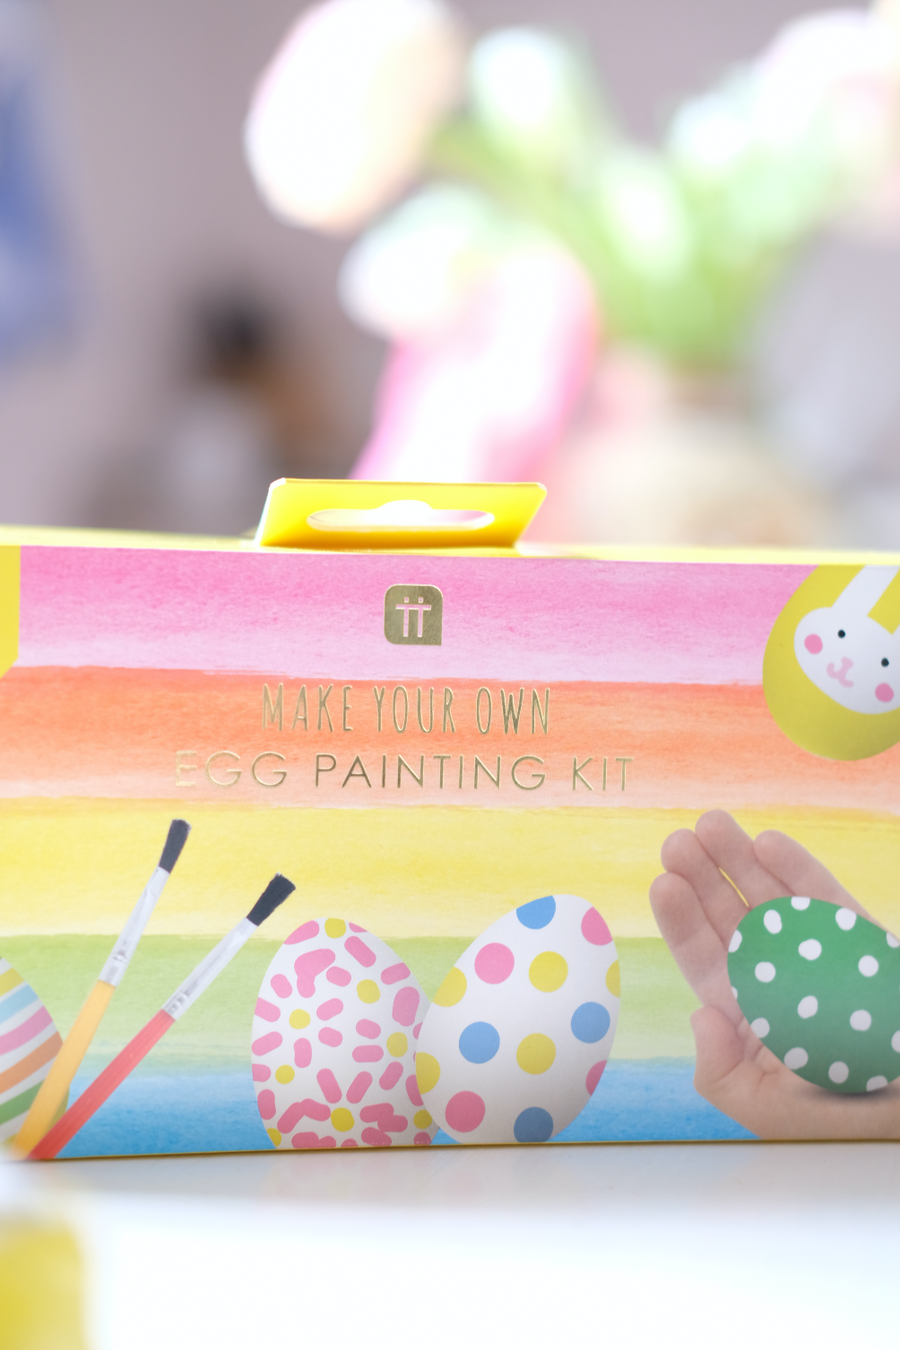 Easter egg painting set including paints/brushes/eggs/hangers